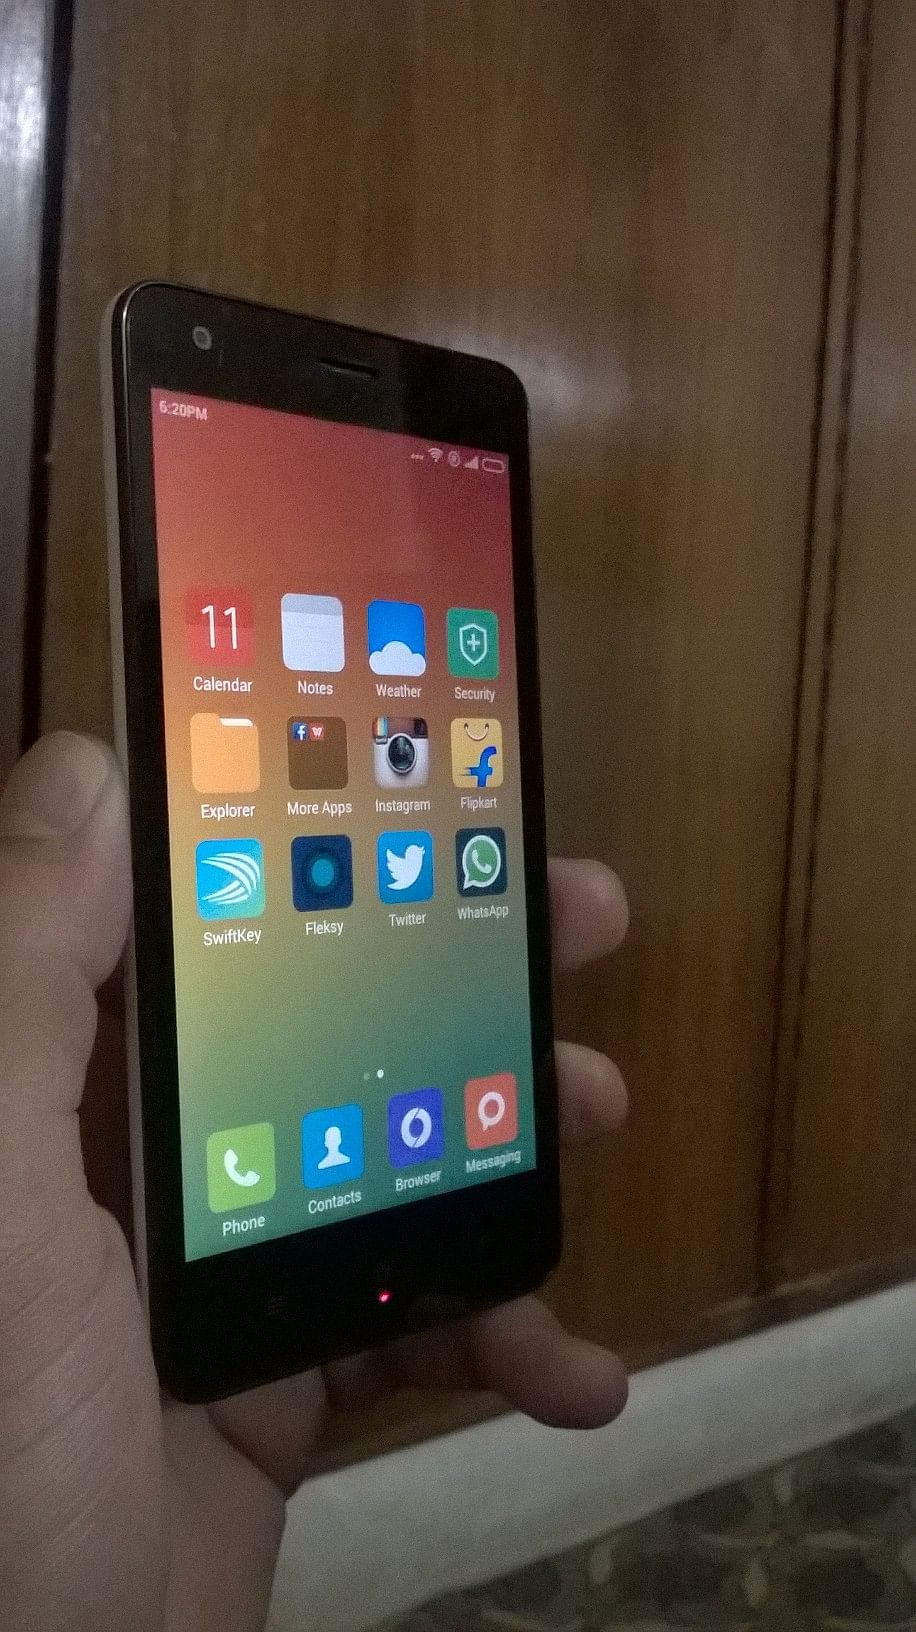 Planning to buy a budget smartphone? Redmi 2 is the best bet for under Rs 7,000.